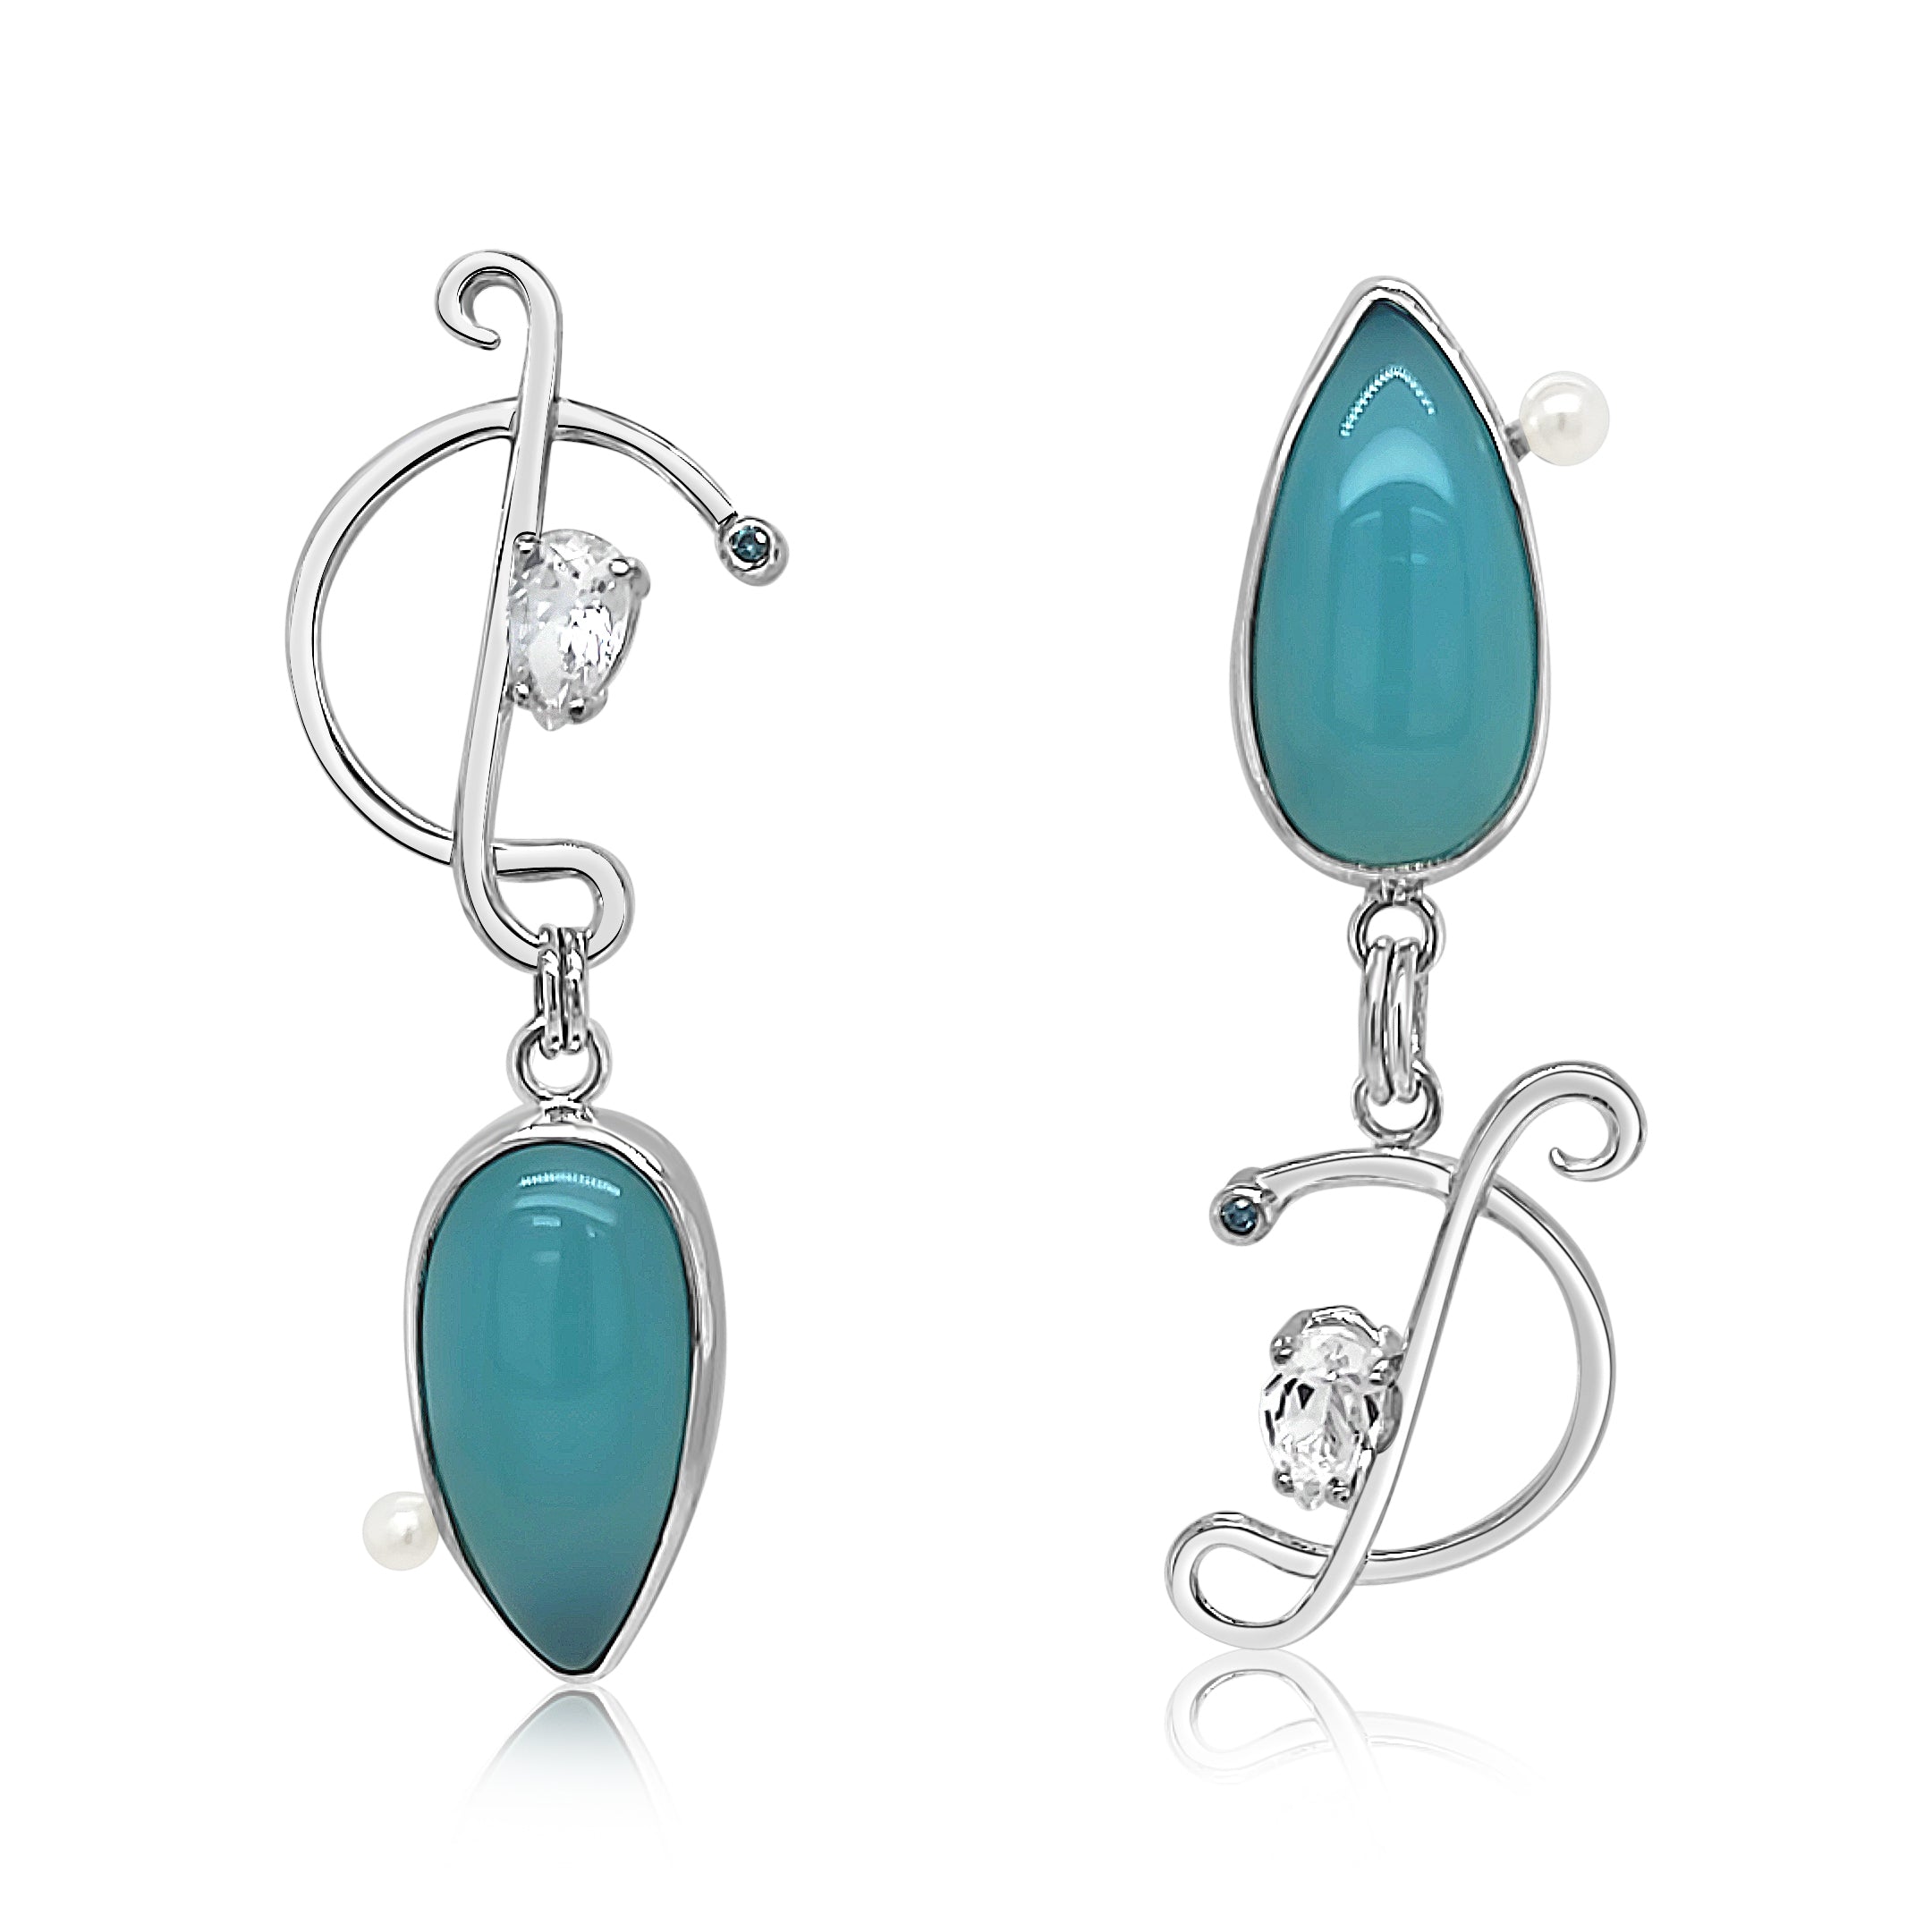 Asymmetric Chalcedony earrings with Blue Diamonds, White topaz, Cubic Zirconia and Freshwater Pearls set in Sterling Silver.